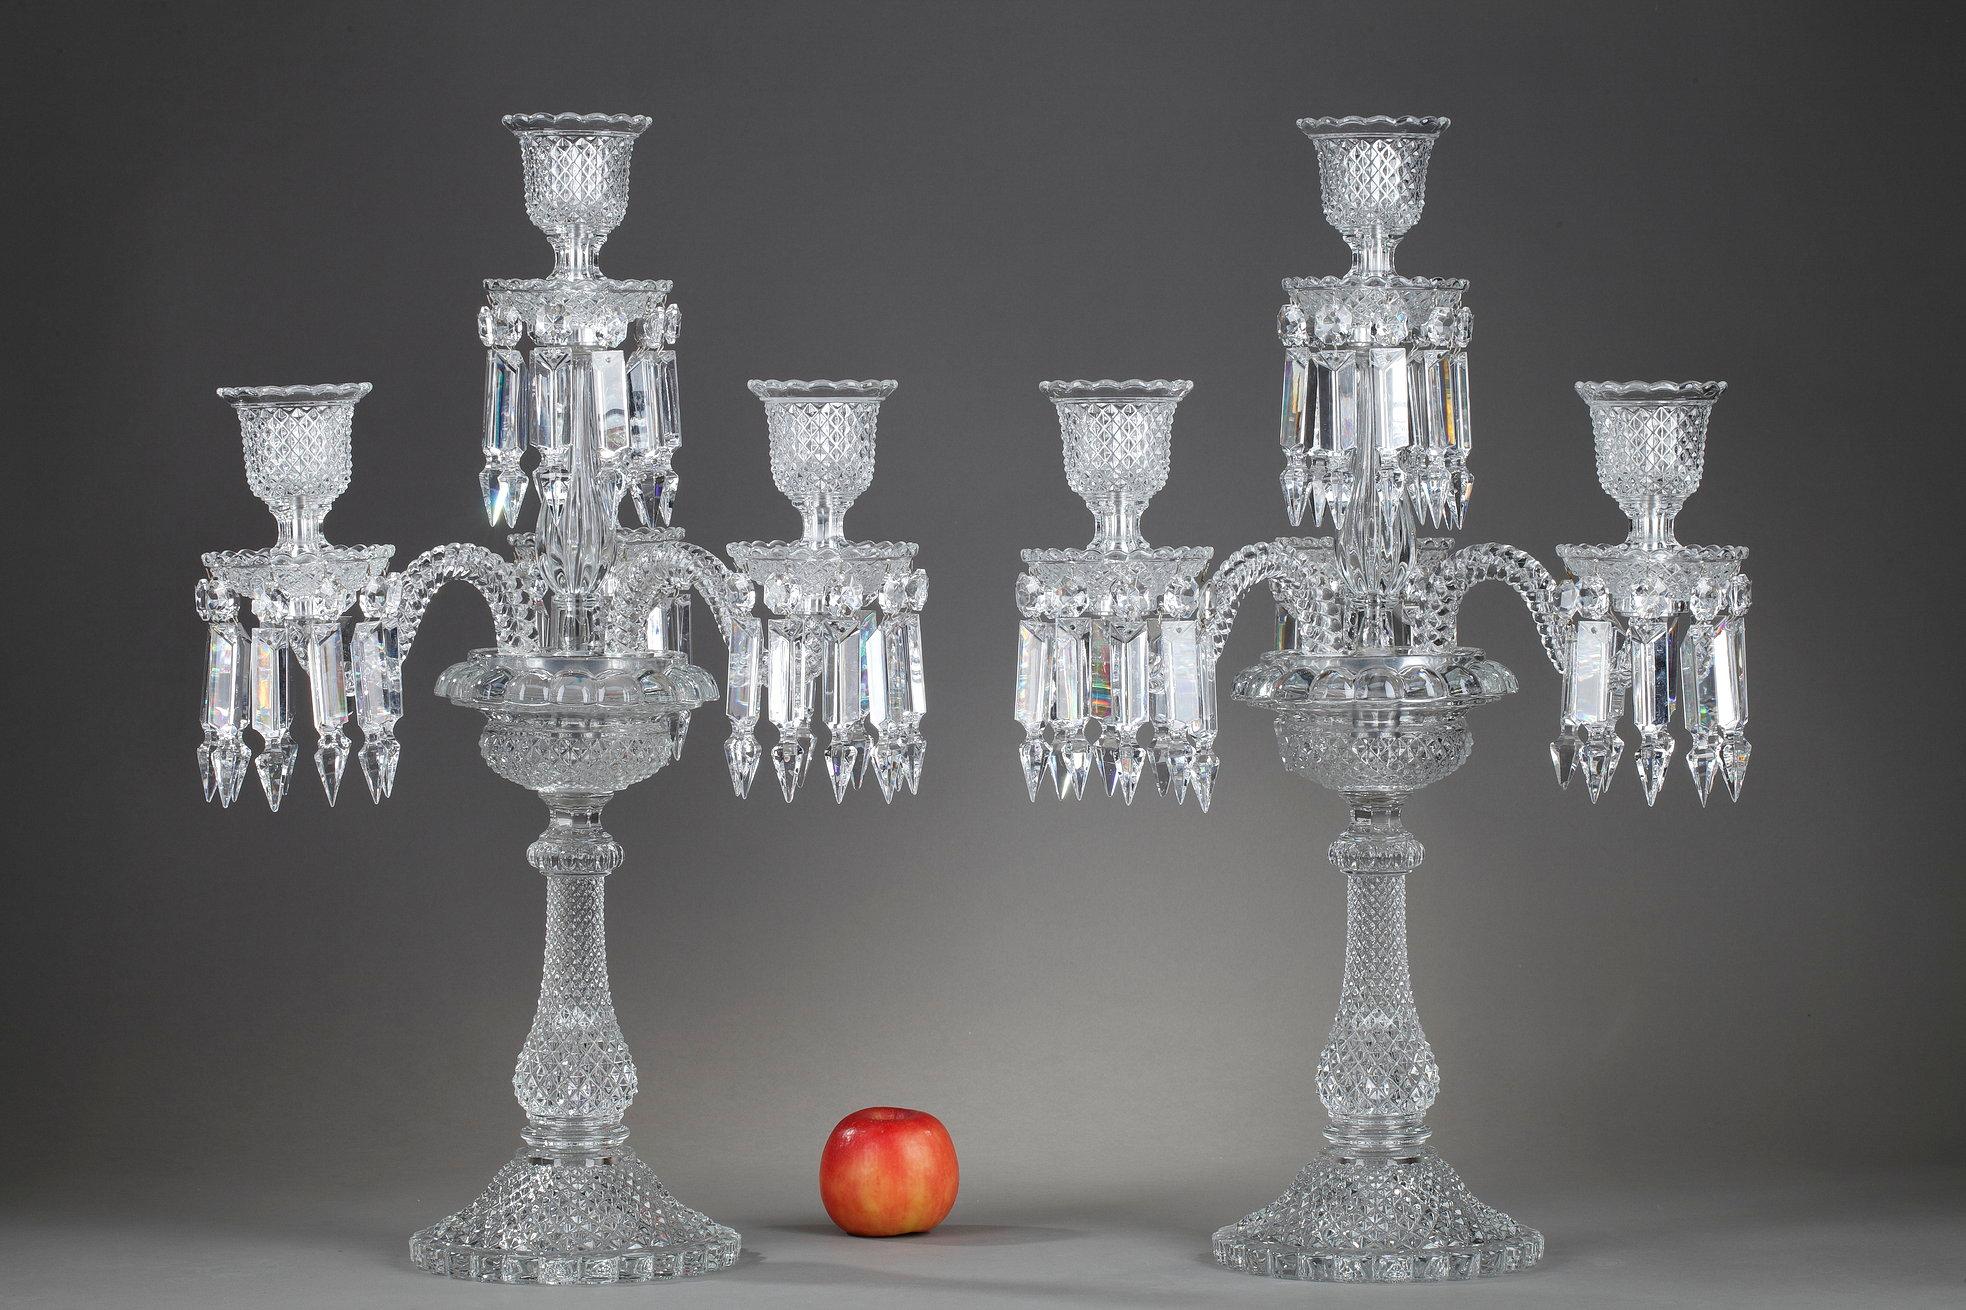 Pair of Baccarat candelabras in molded crystal with four lights. Those candlesticks are composed of three twisted arms of lights decorated with geometrical pendants and an upper post. The shaft is decorated with a guilloche pattern. The base is made